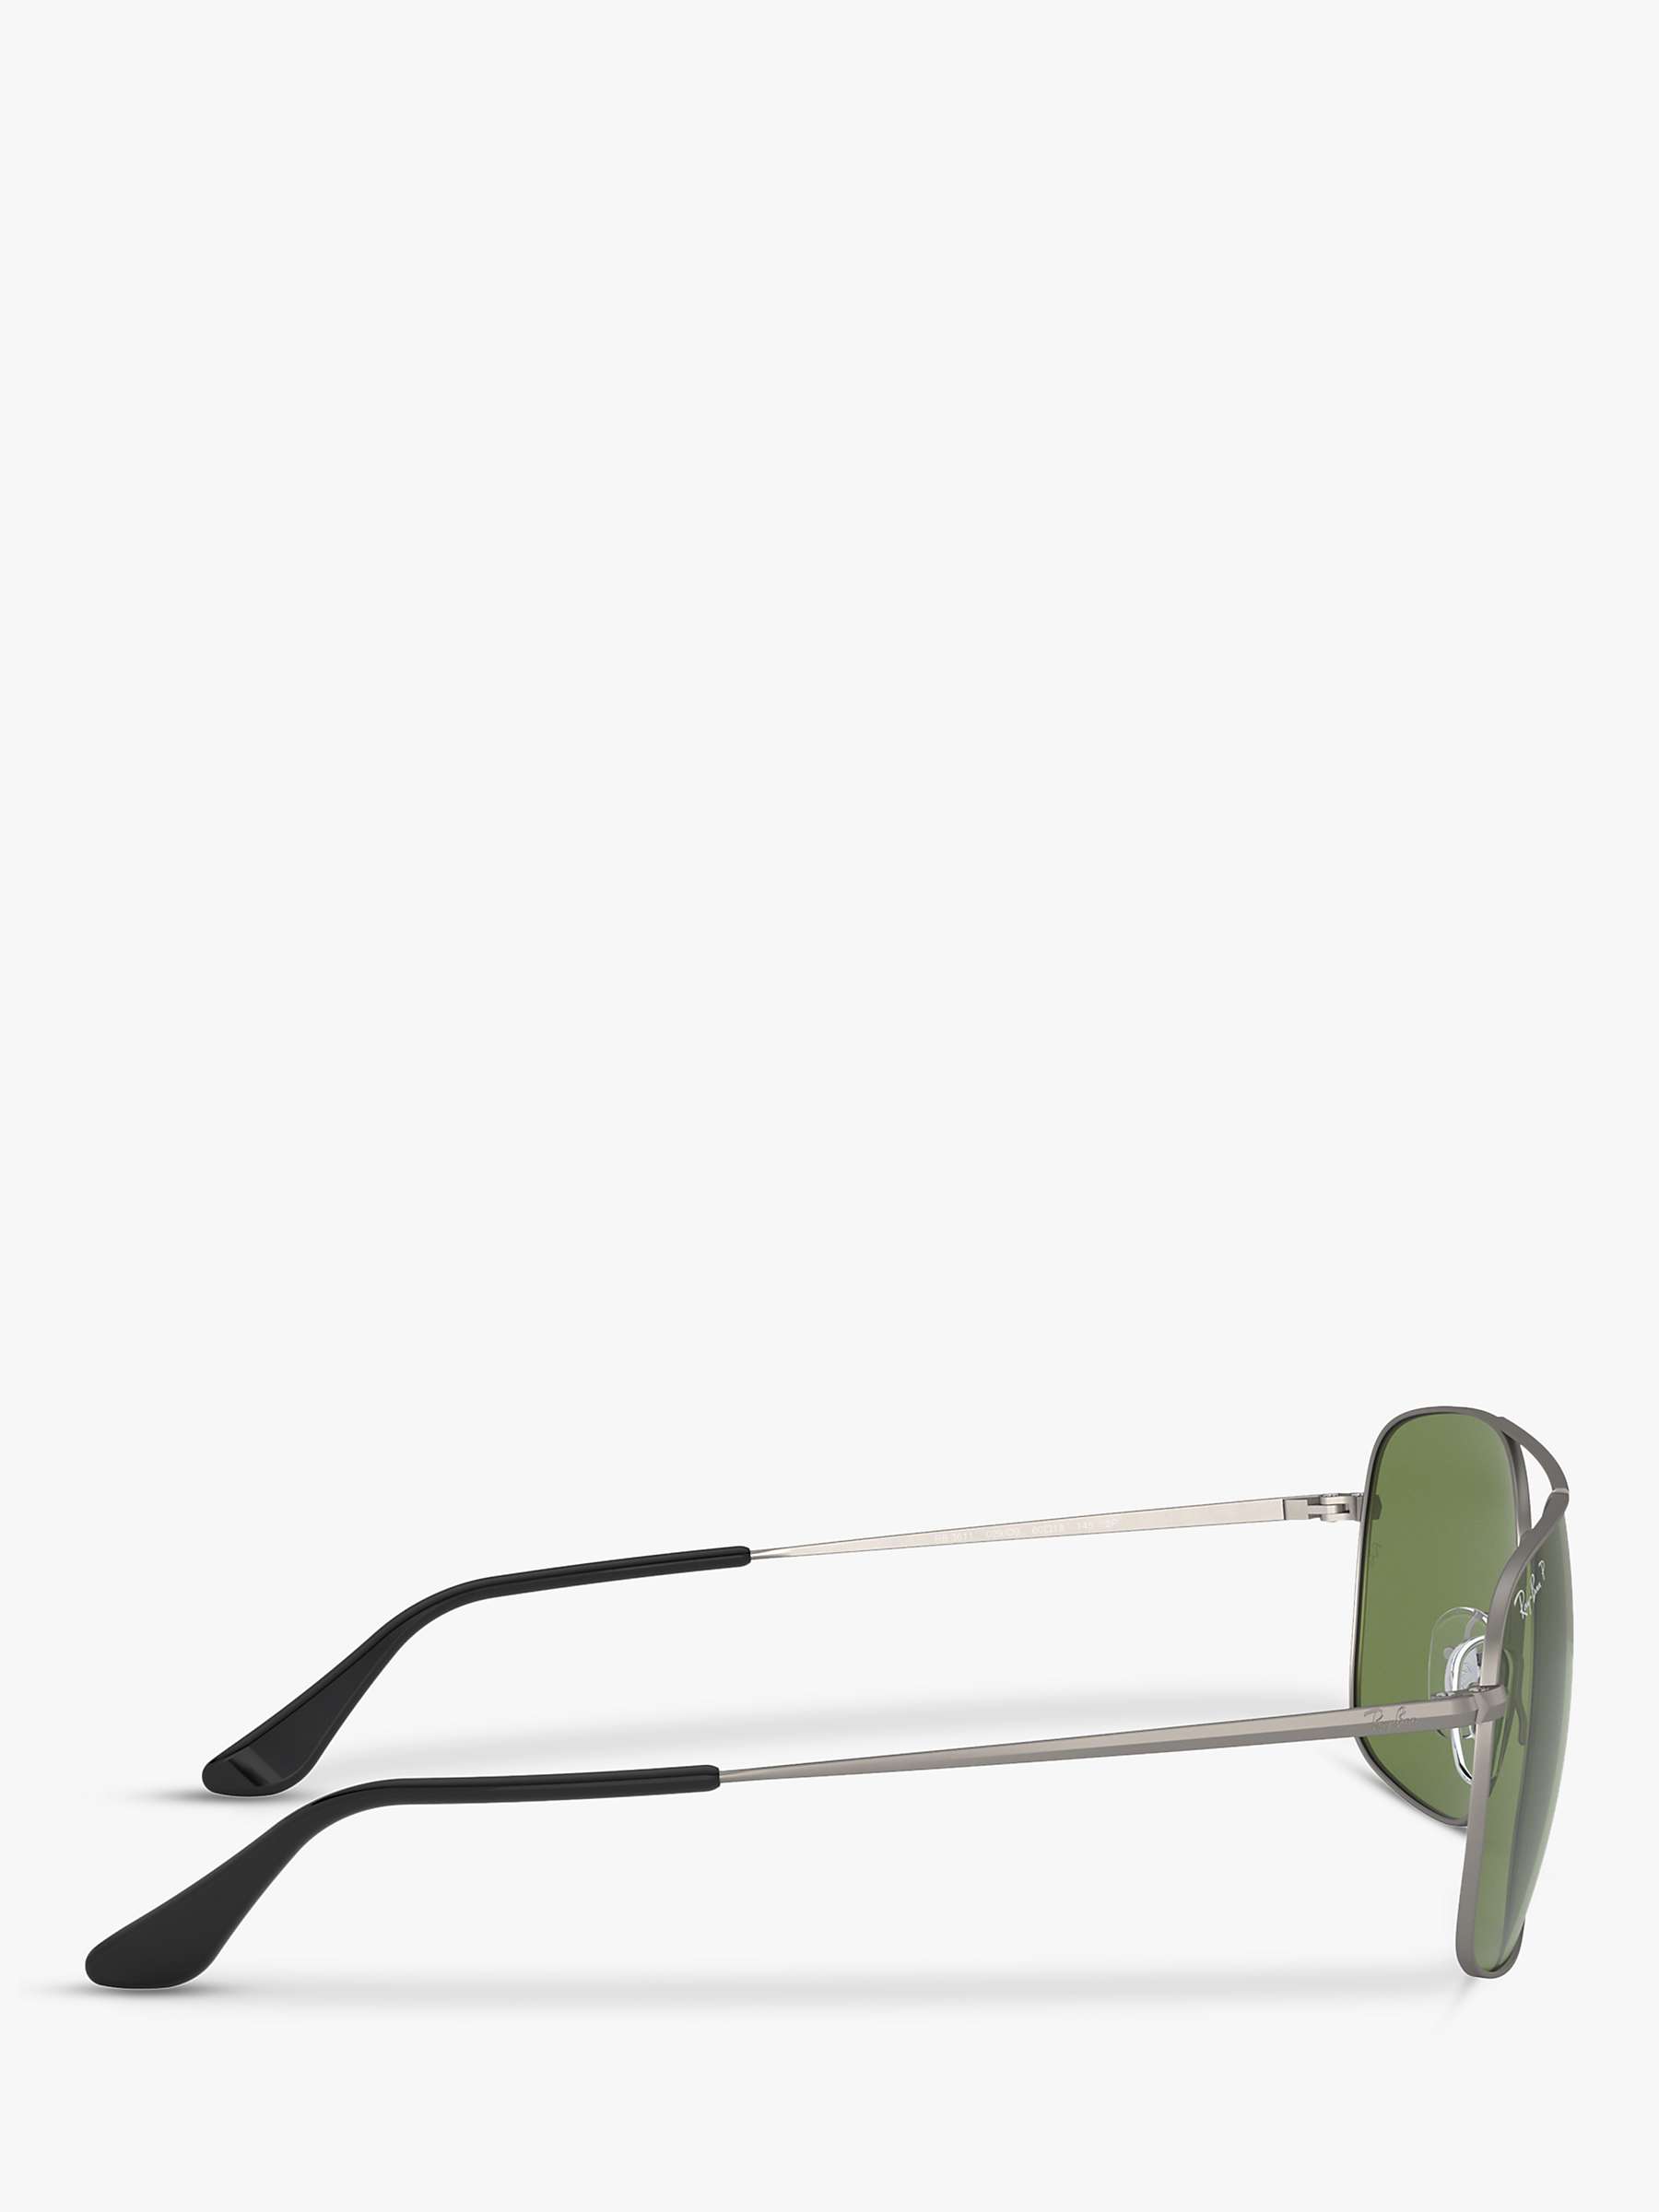 Buy Ray-Ban RB3611 Unisex The Colonel Polarised Square Sunglasses, Matte Gunmetal/Green Online at johnlewis.com